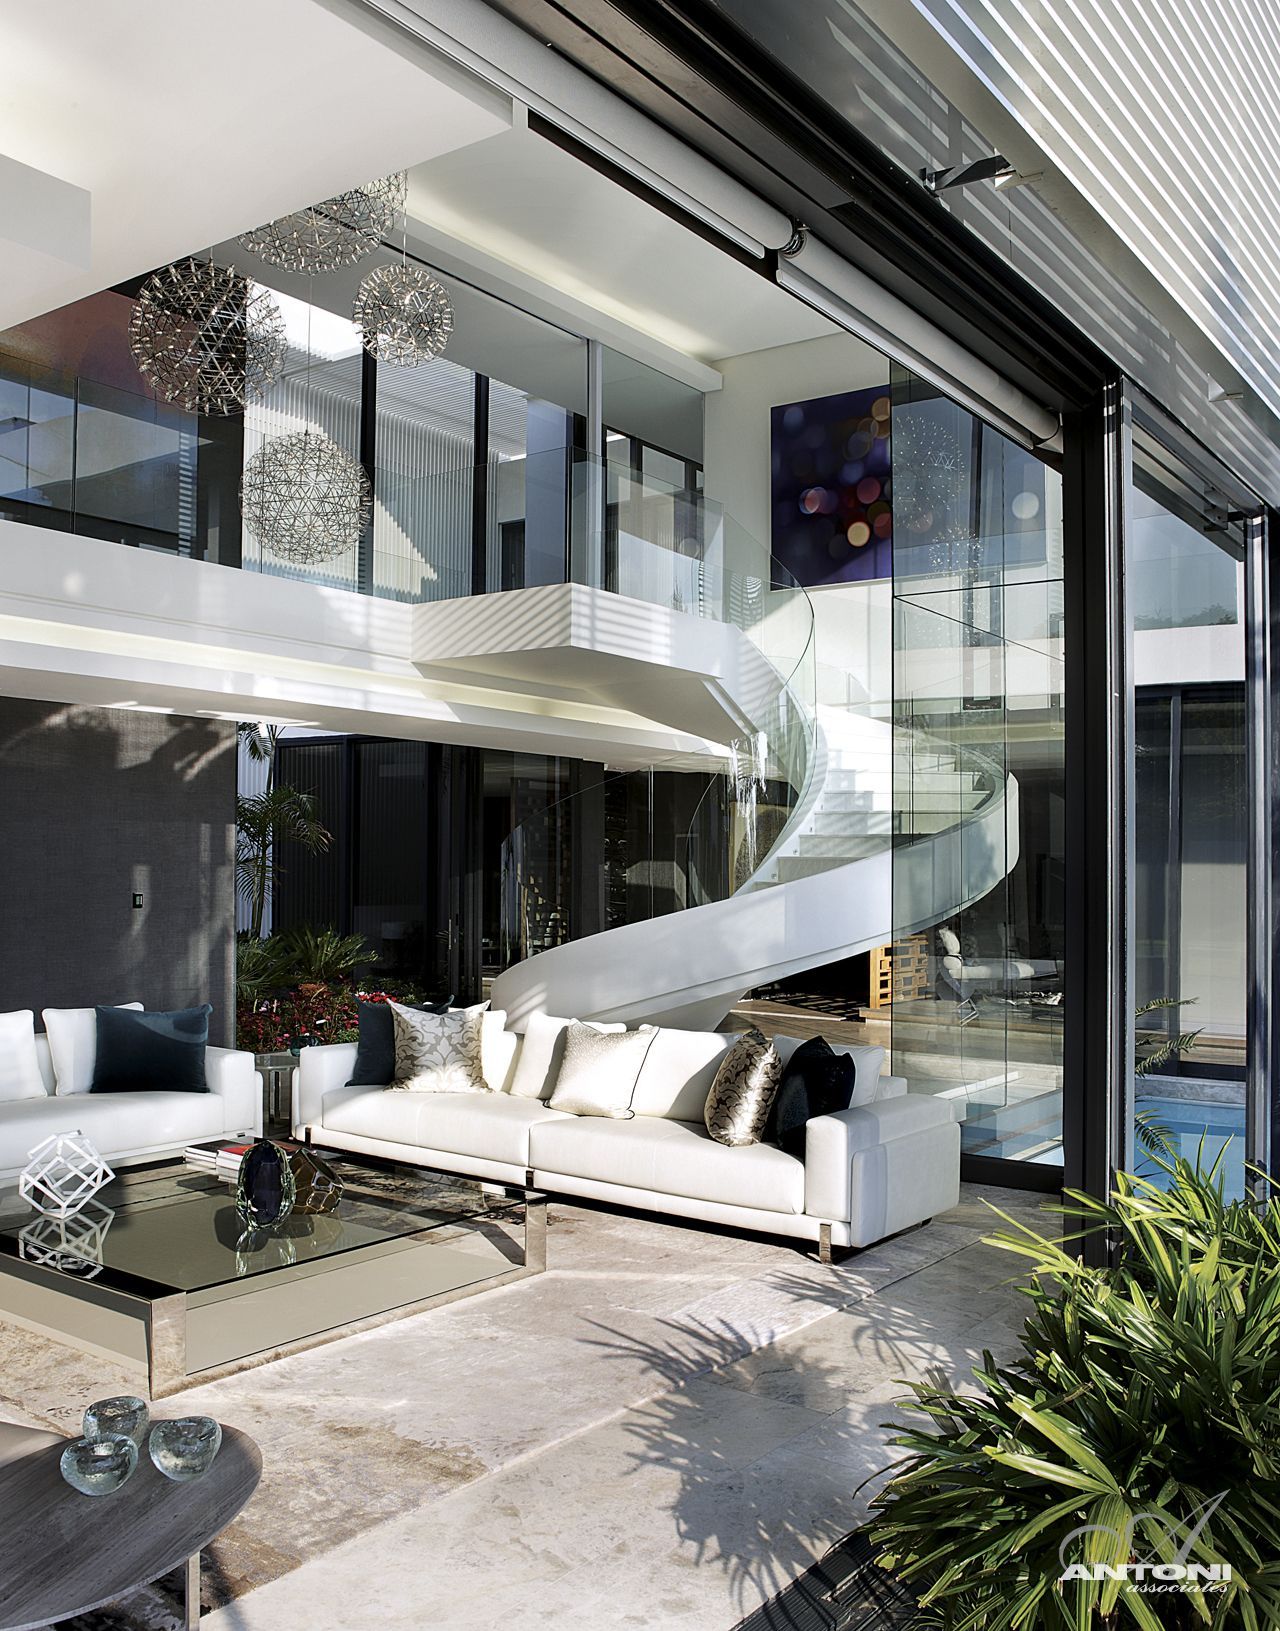 Houghton-ZM-Residence-in-South-Africa-by-SAOTA-13